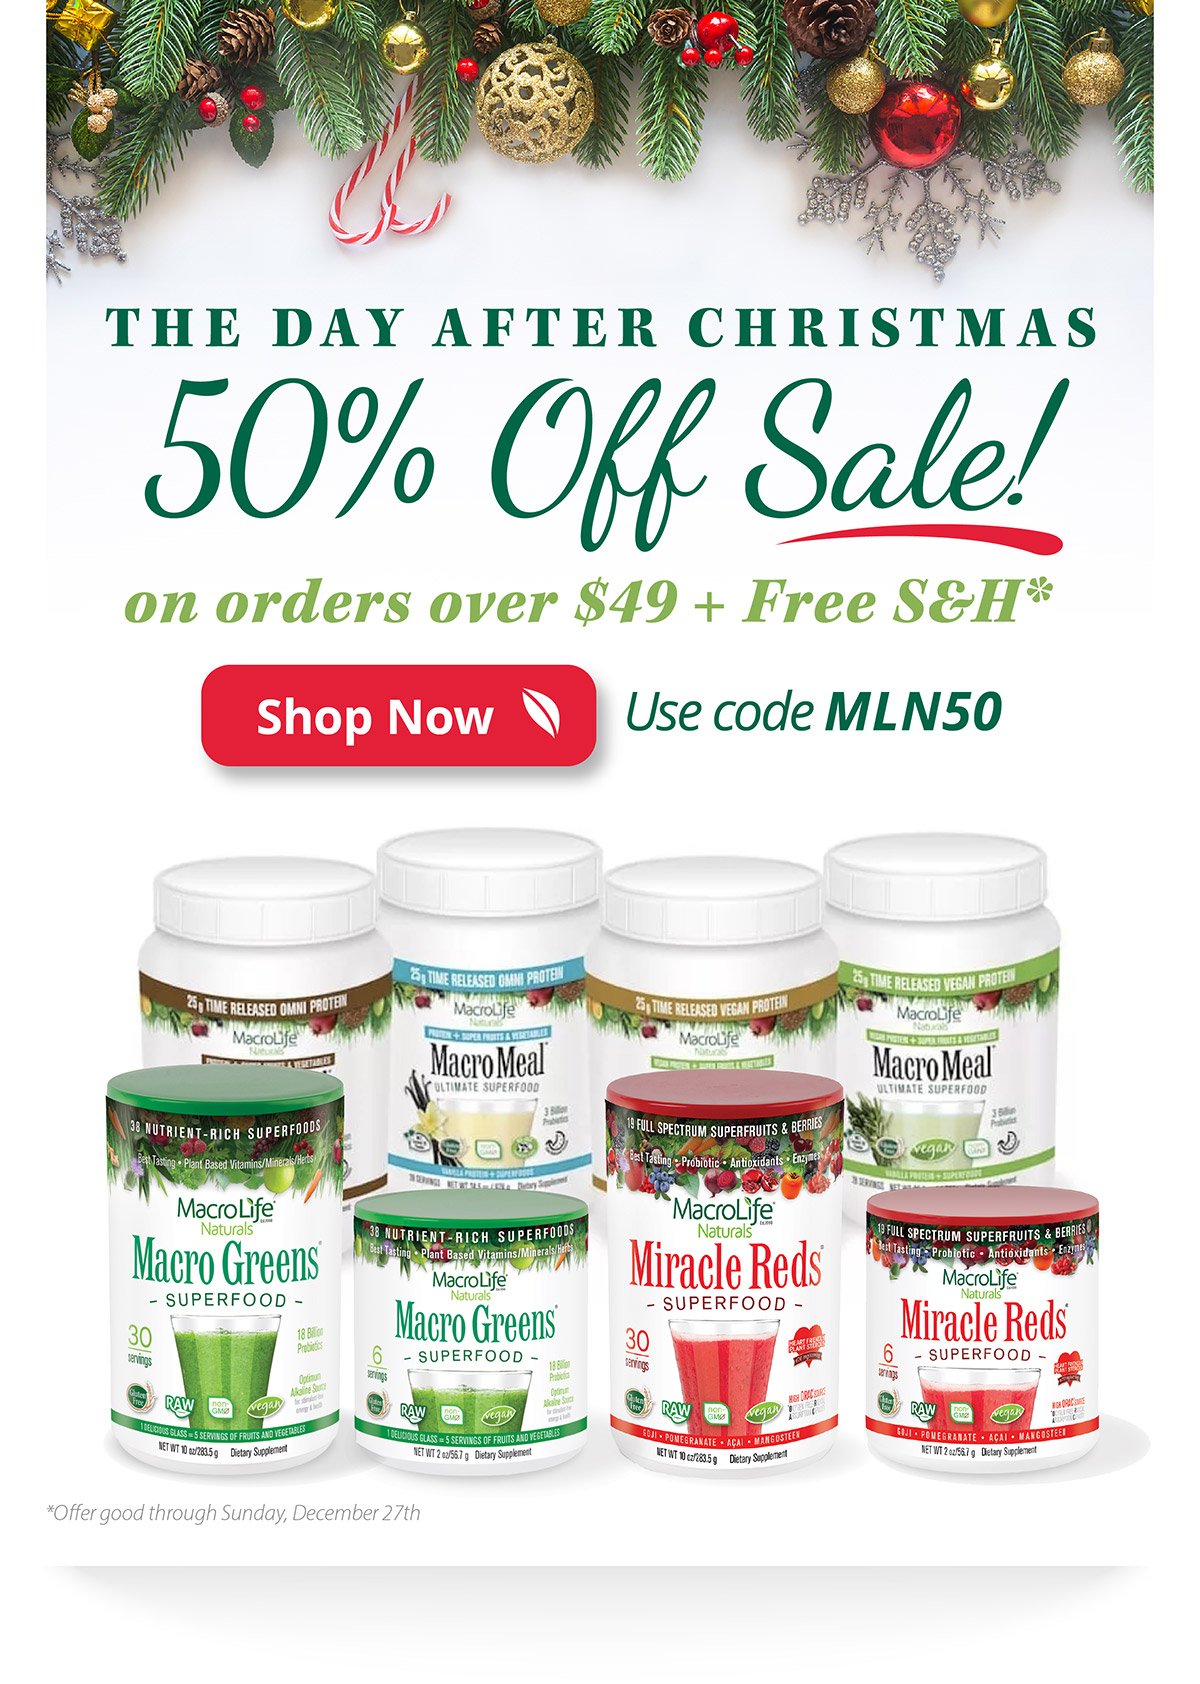 THE DAY AFTER CHRISTMAS 50% Off Sale! on orders over $49 + Free S&H* | Shop Now | Use code MLN50